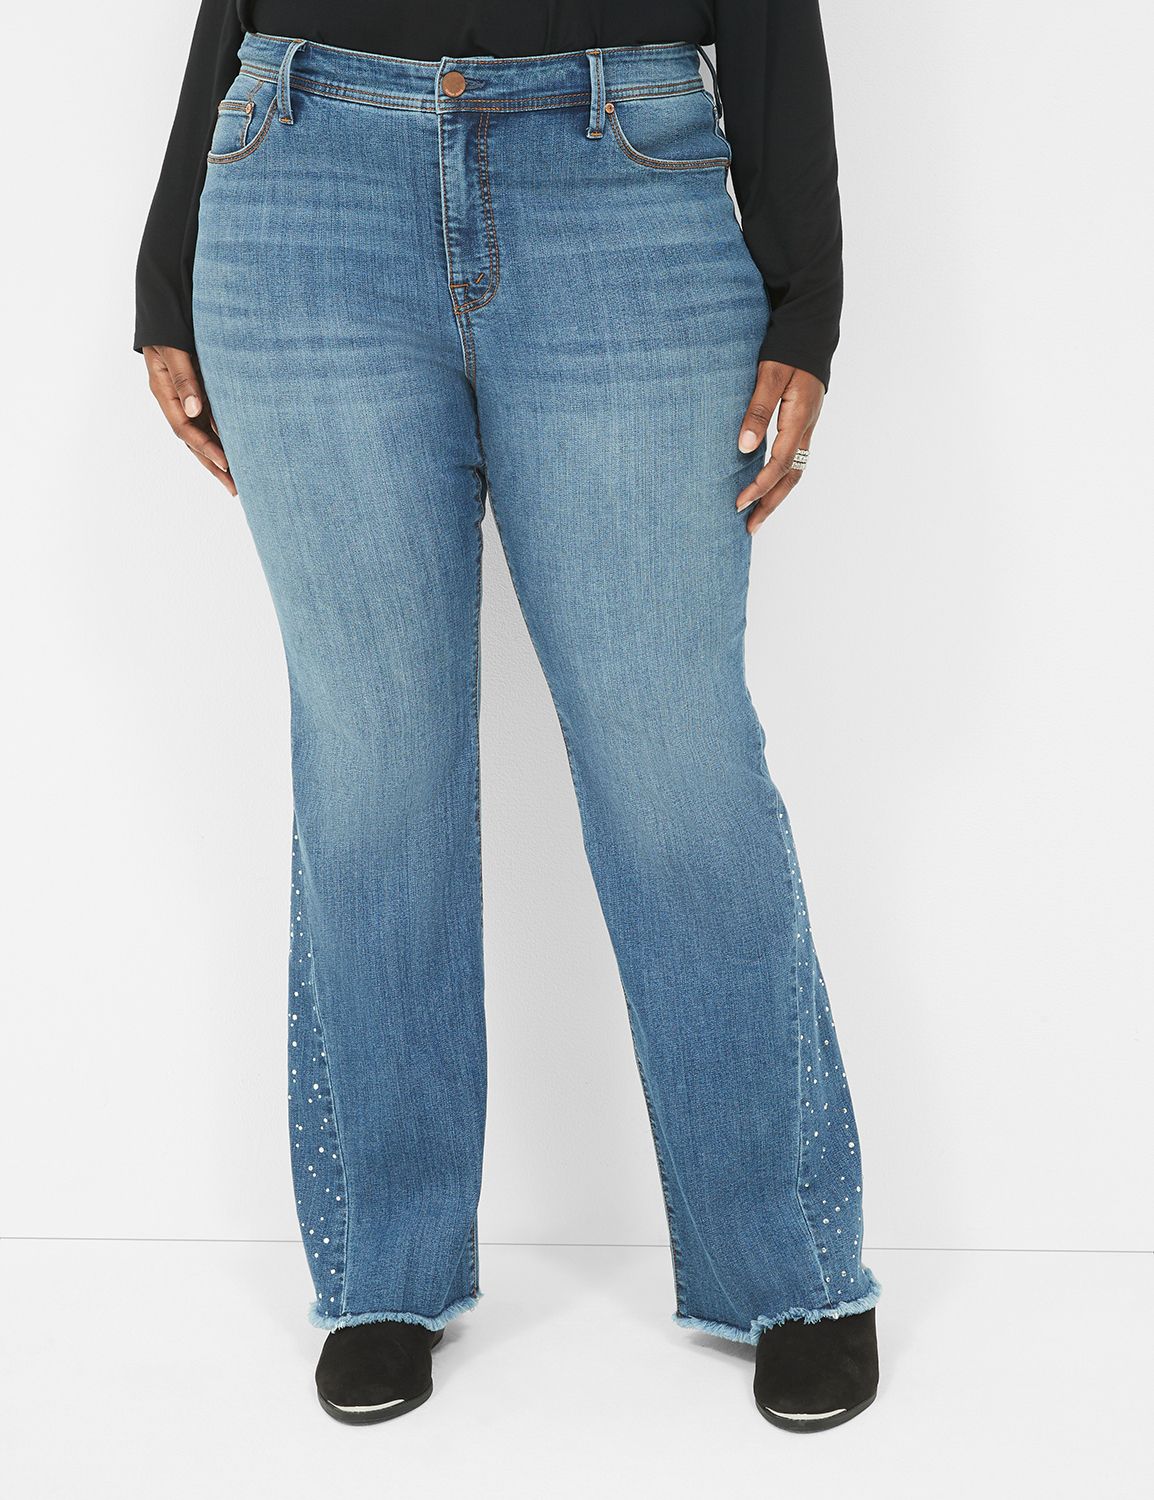 Plus Size Flare Jeans & Bootcut Jeans